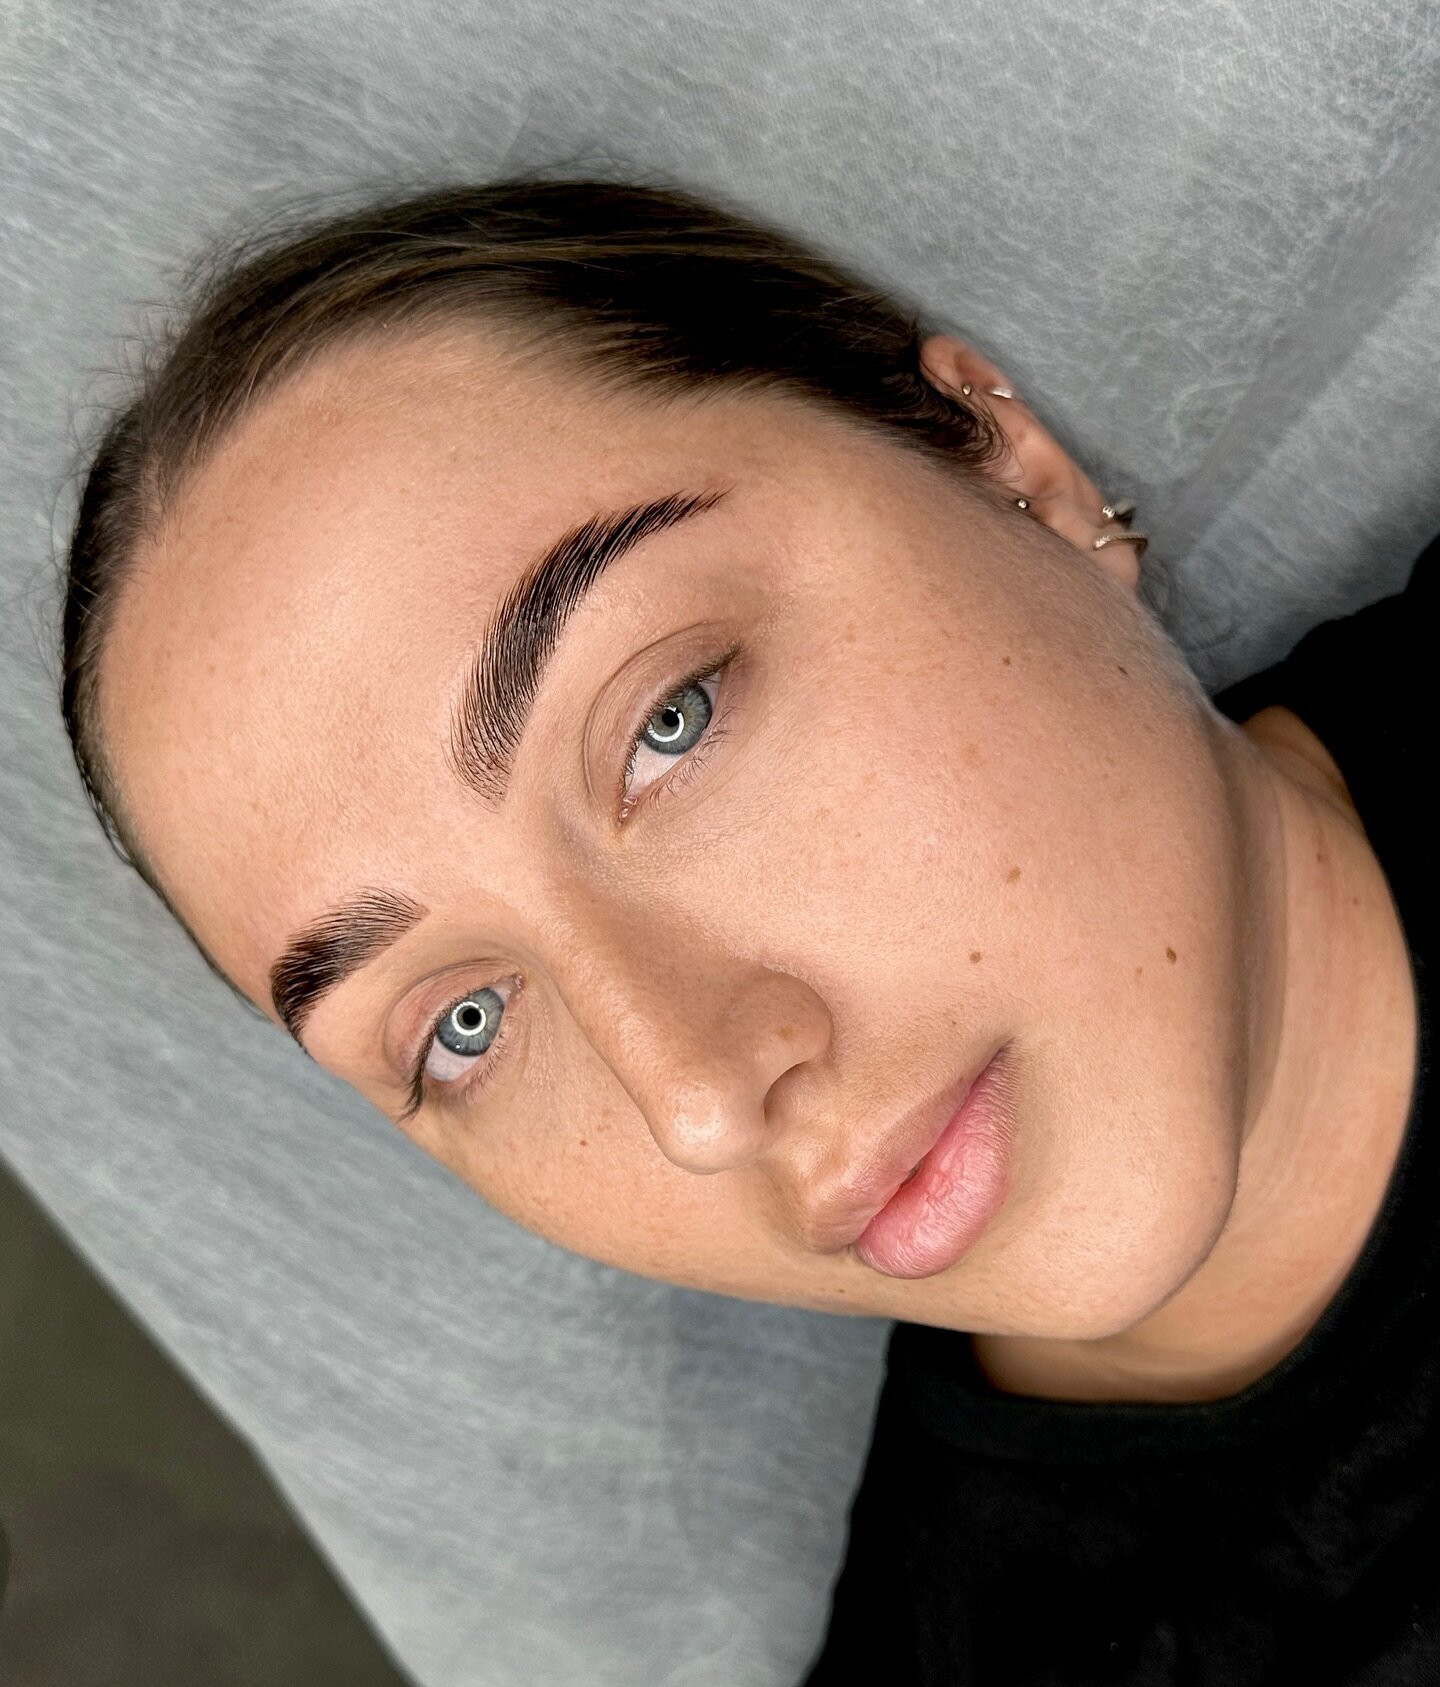 Brow lamination treatment for our beautiful client &hellip;..

#browmapping #browsfordays #contentideas #browartist #wowbrow #browboss #browpaste #browmasterclass #browartistry #browshaping #browwaxing #brisbanebeautysalon
#brisbanebrows #browhacks #